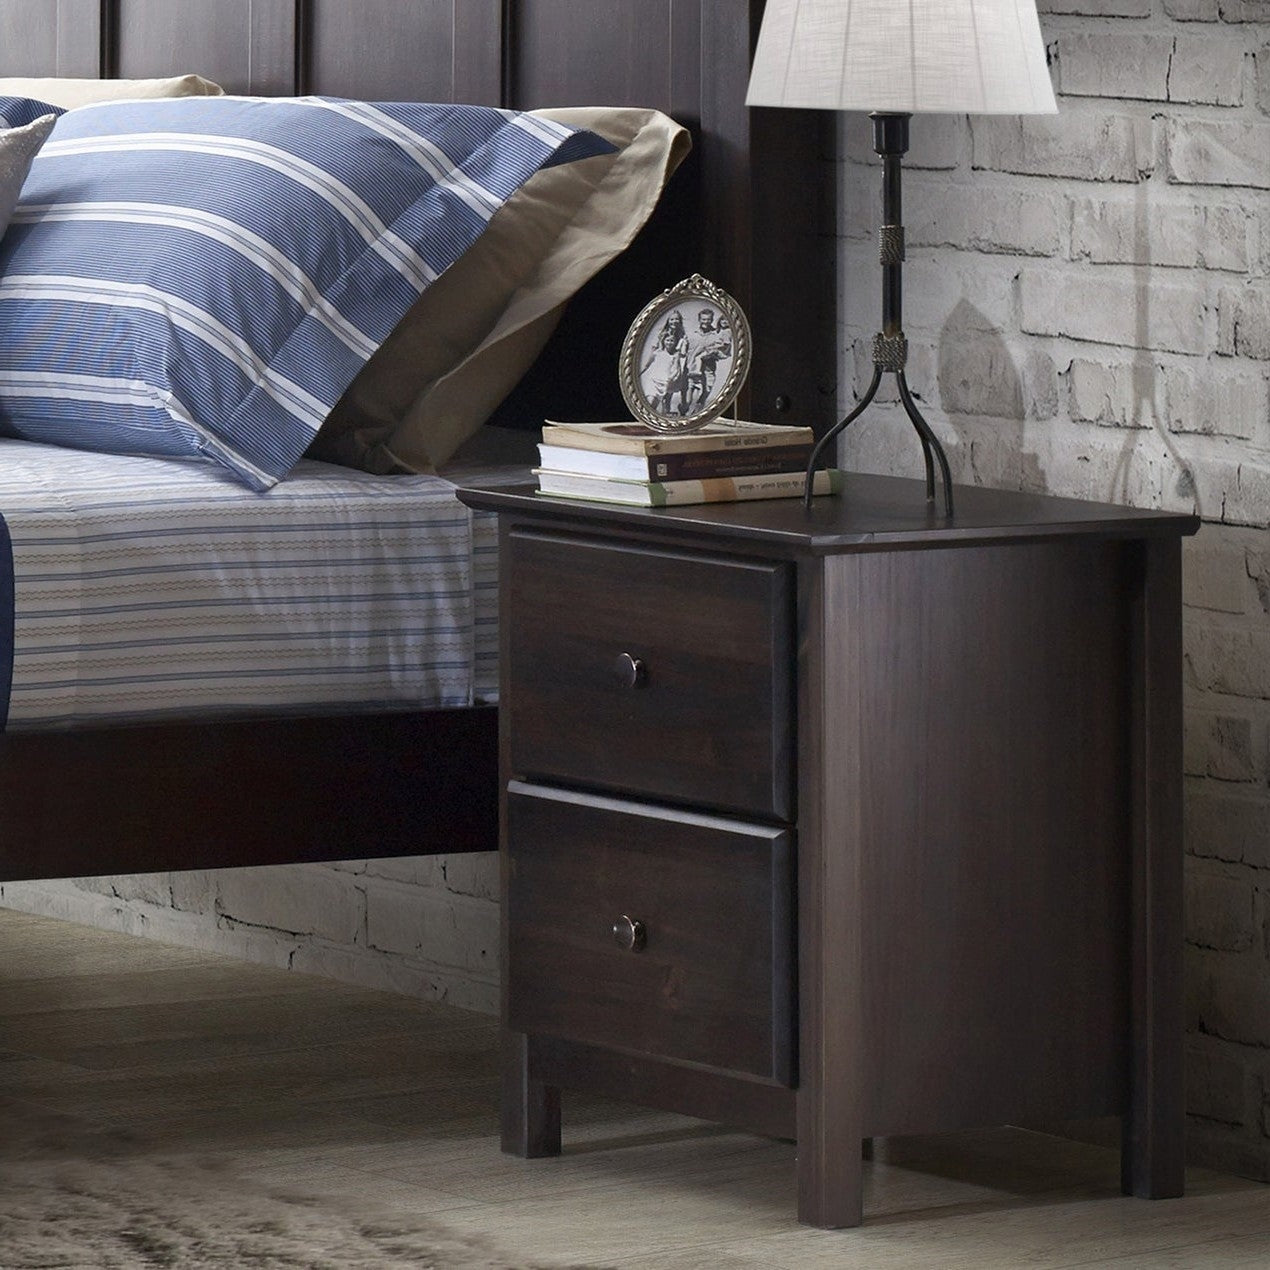 Bedroom > Nightstand And Dressers - Farmhouse Solid Pine Wood 2 Drawer Nightstand In Espresso